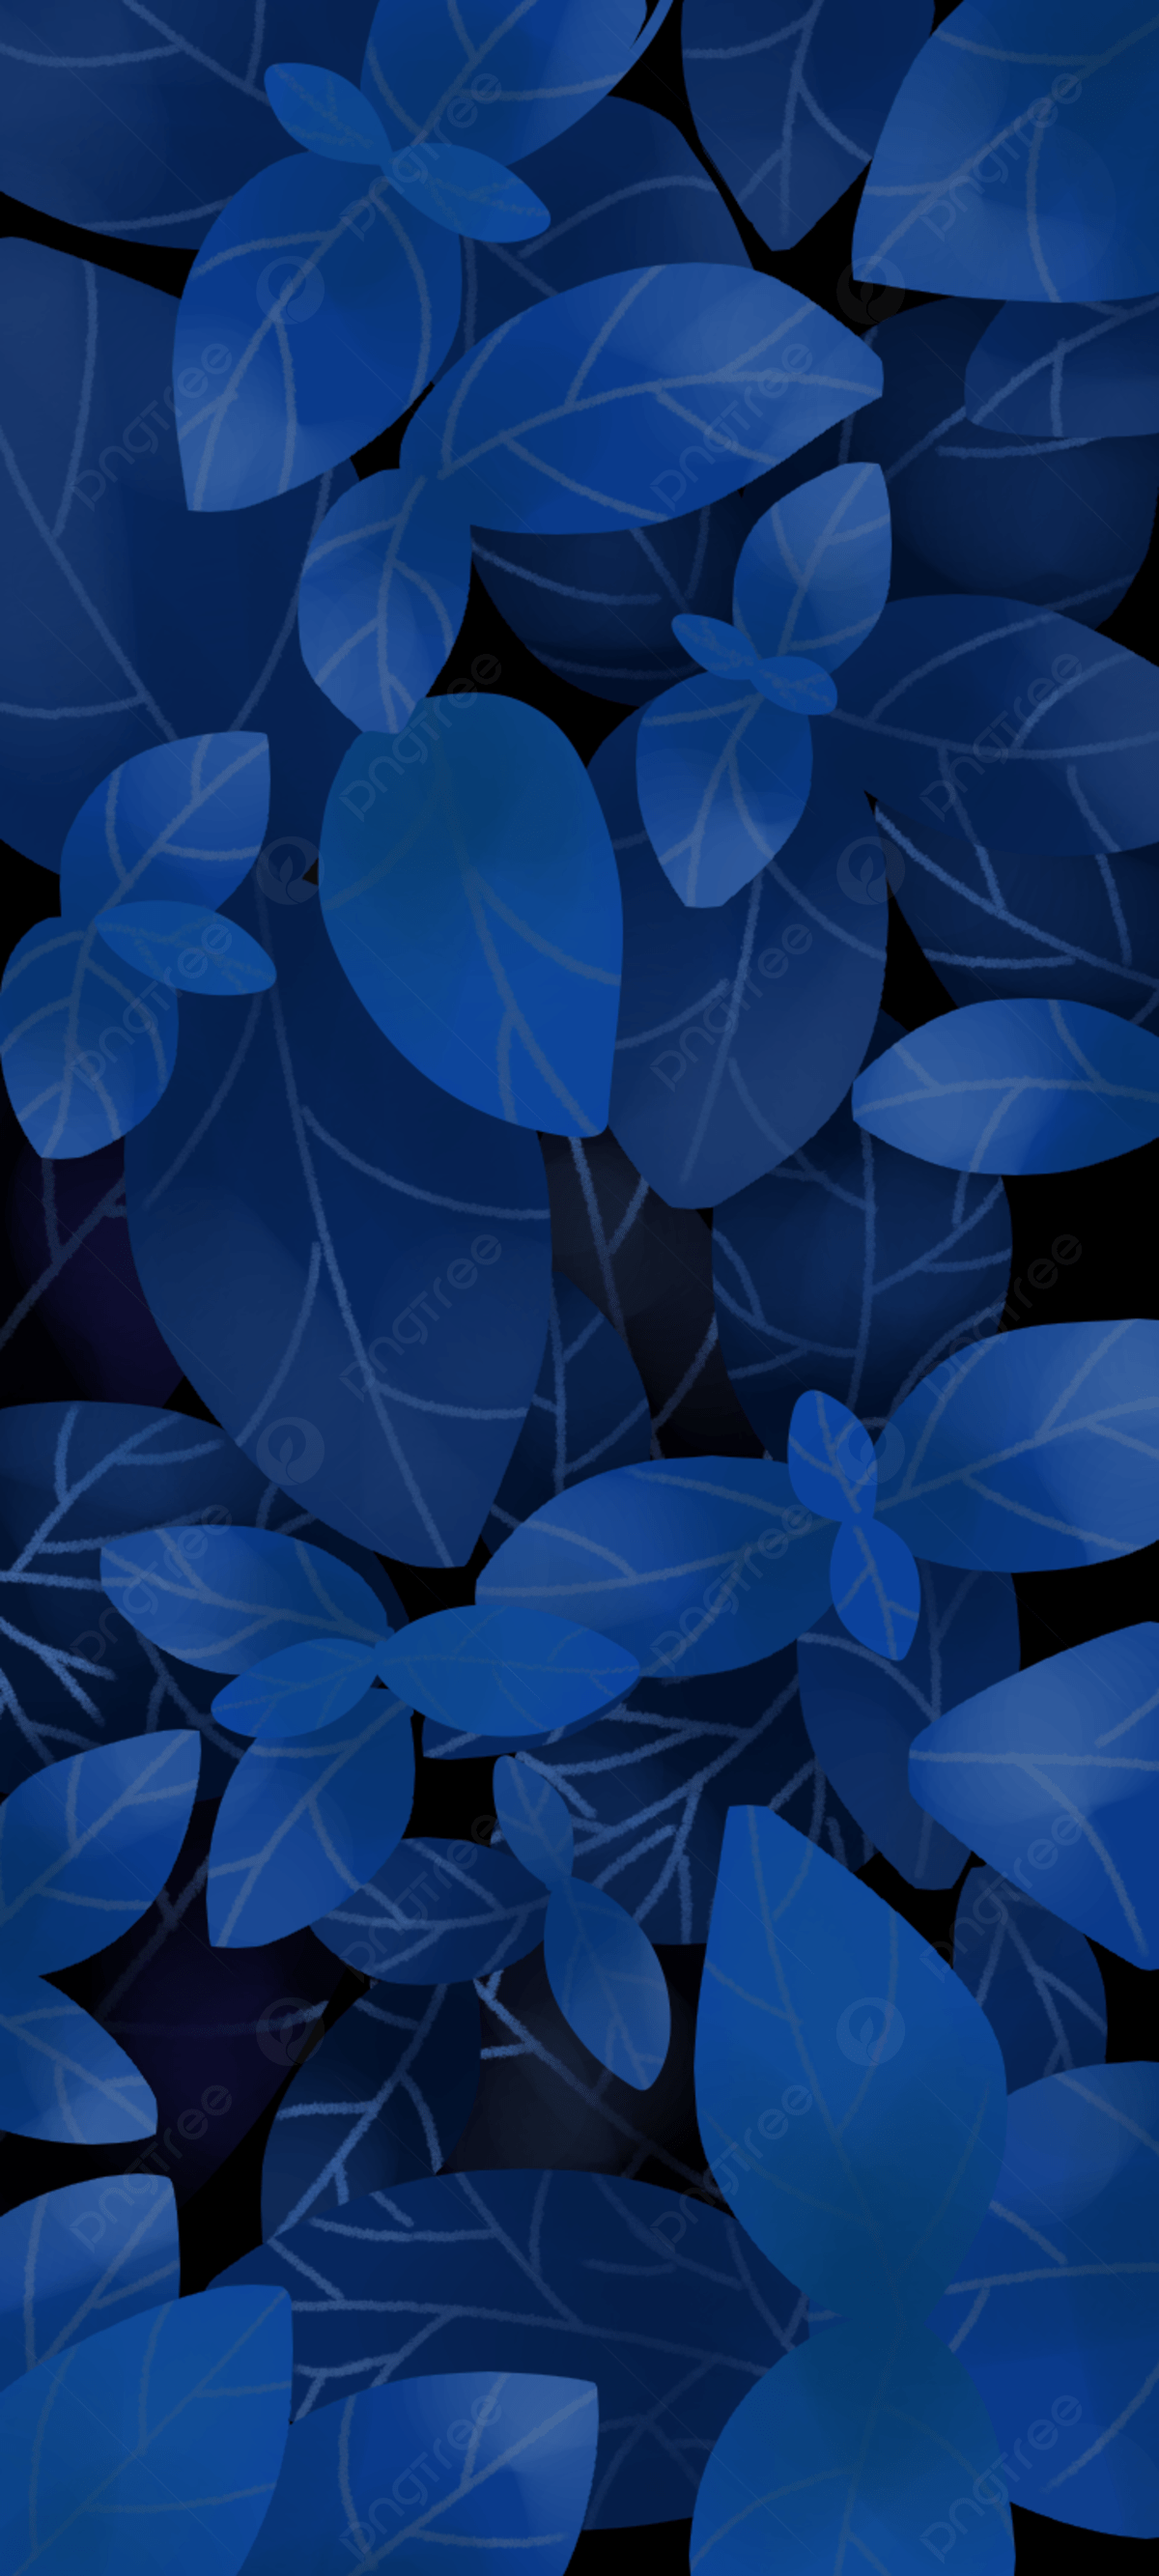 Aesthetic Blue Leaf Nature Wallpaper By One Art Background Wallpaper Image For Free Download